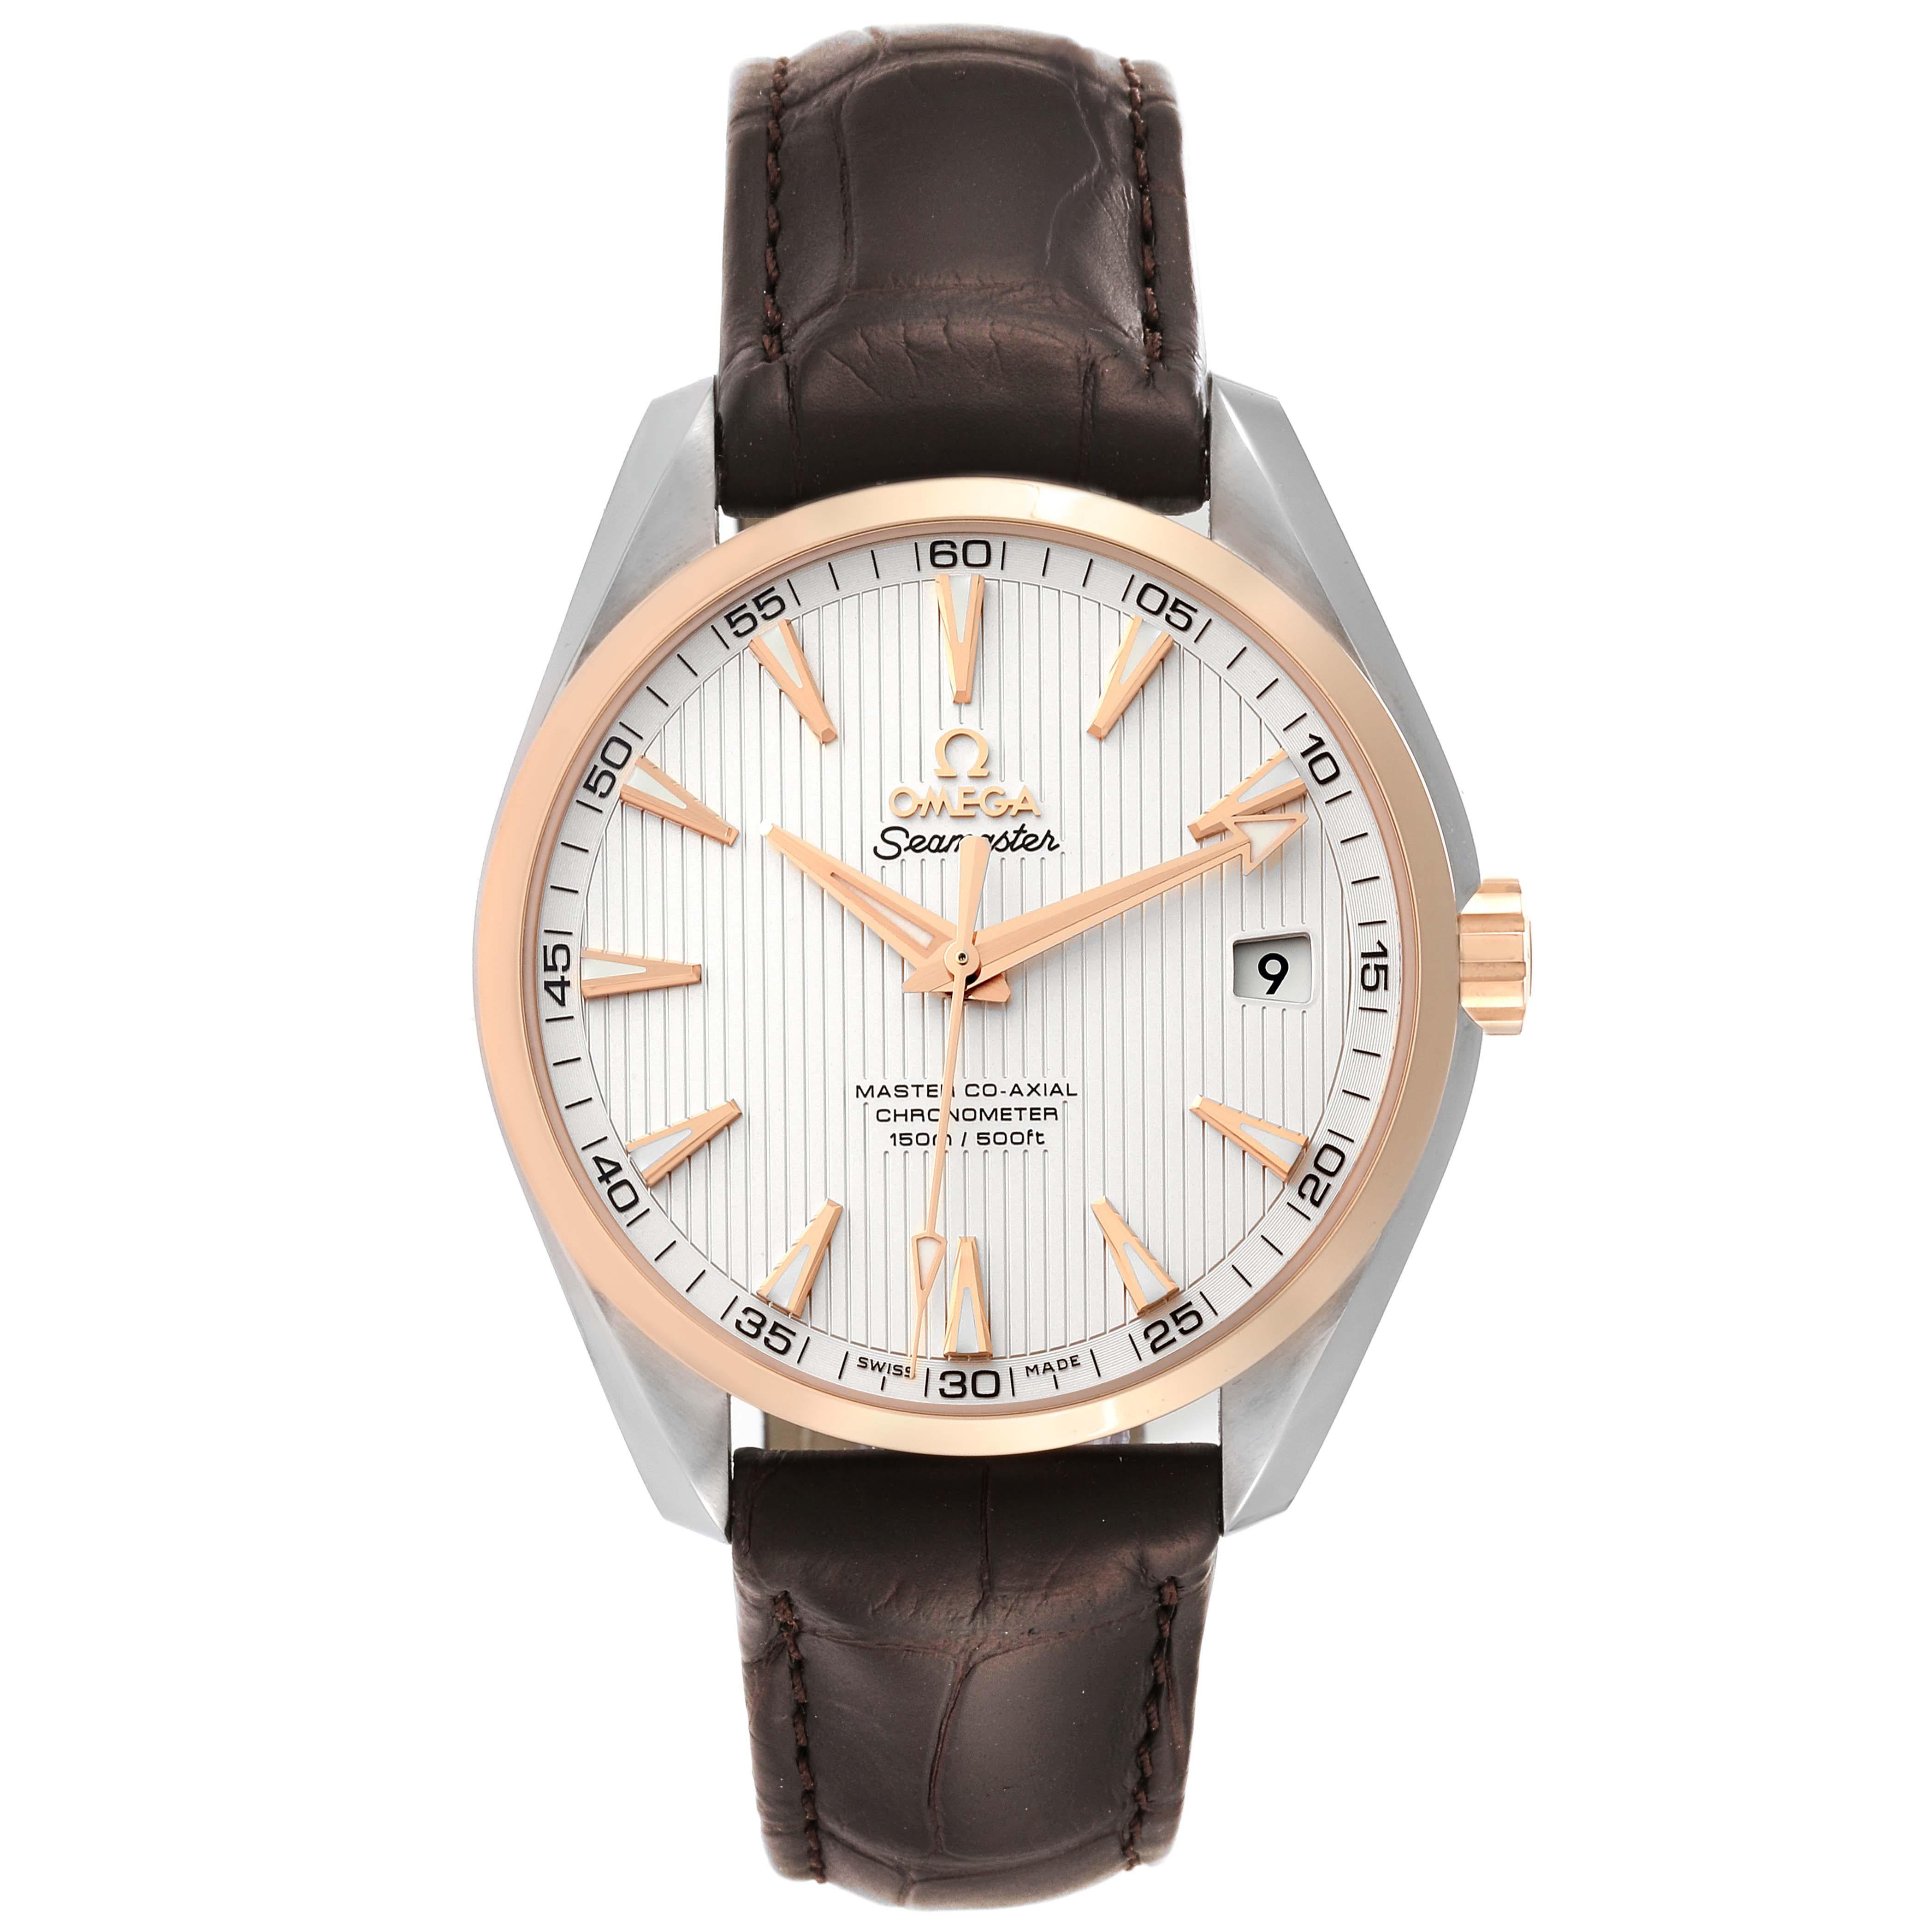 Omega Seamaster Aqua Terra Steel Rose Gold Mens Watch 231.23.42.21.02.001. Automatic self-winding movement. Stainless steel round case 41.5 mm in diameter. Exhibition transparent sapphire crystal caseback. 18k rose gold smooth bezel. Scratch